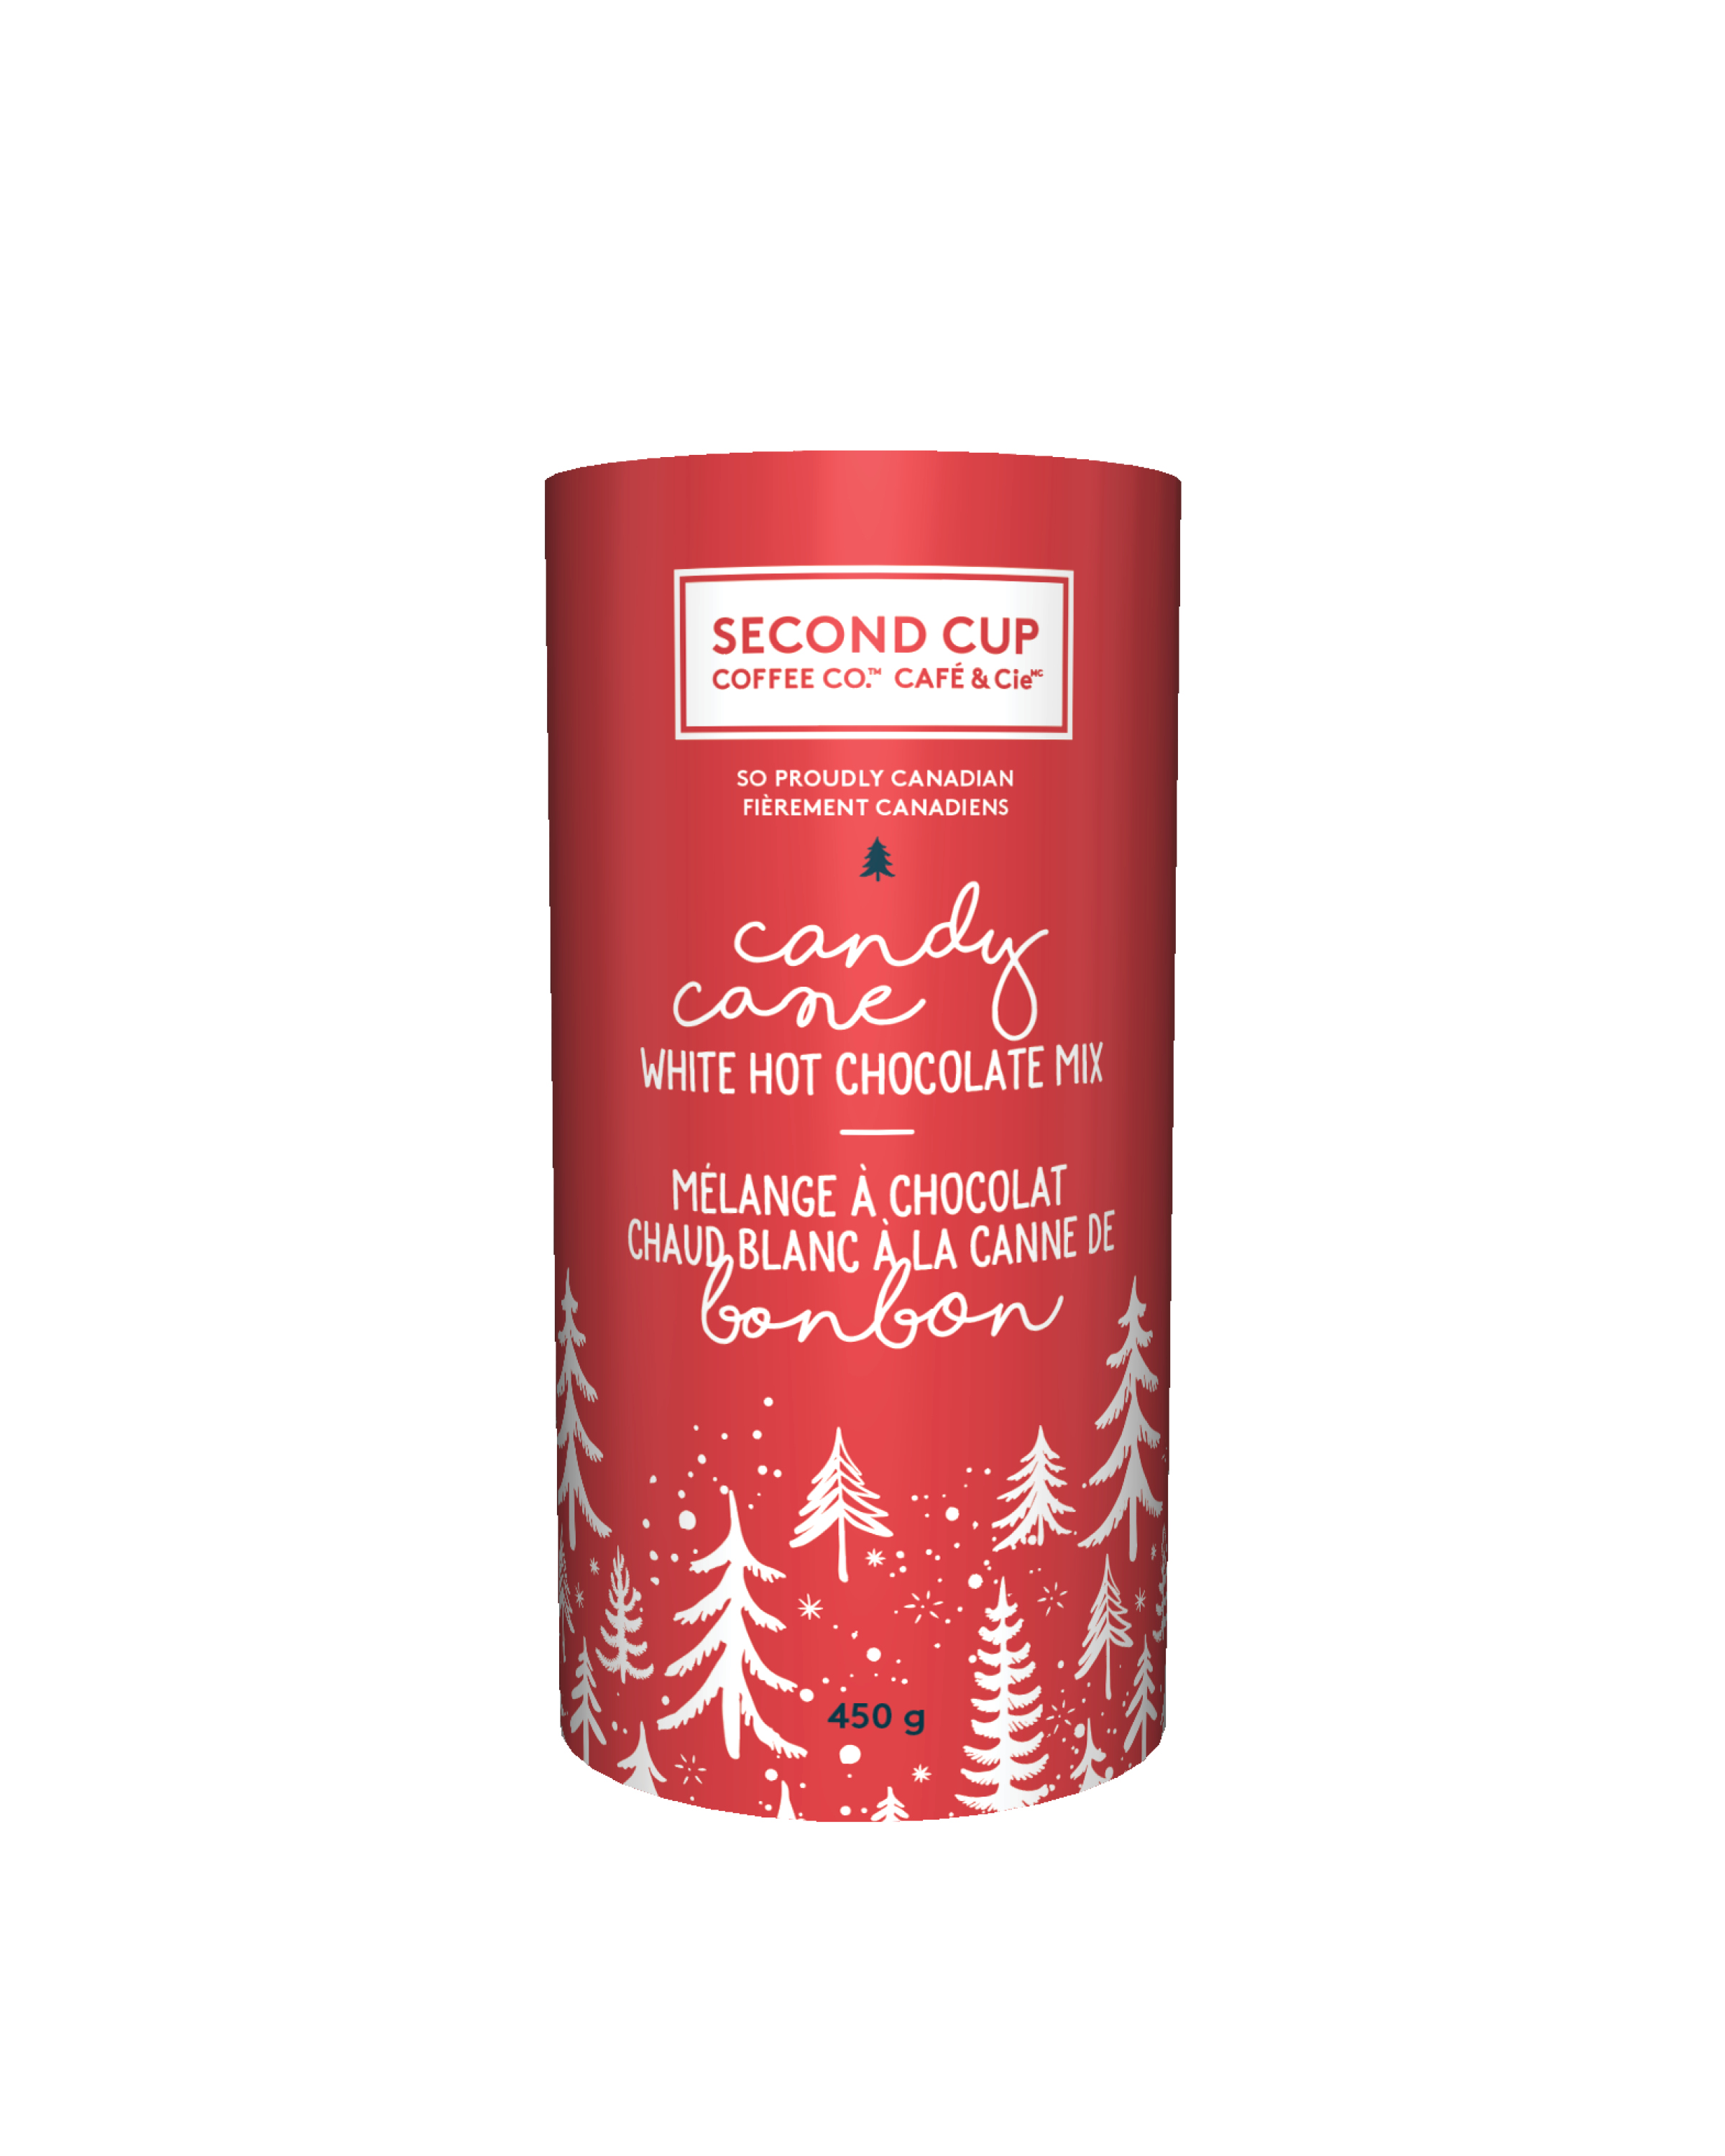 Canada Winter Scene / Christmas 2014 Gift Card $0 SECOND CUP 